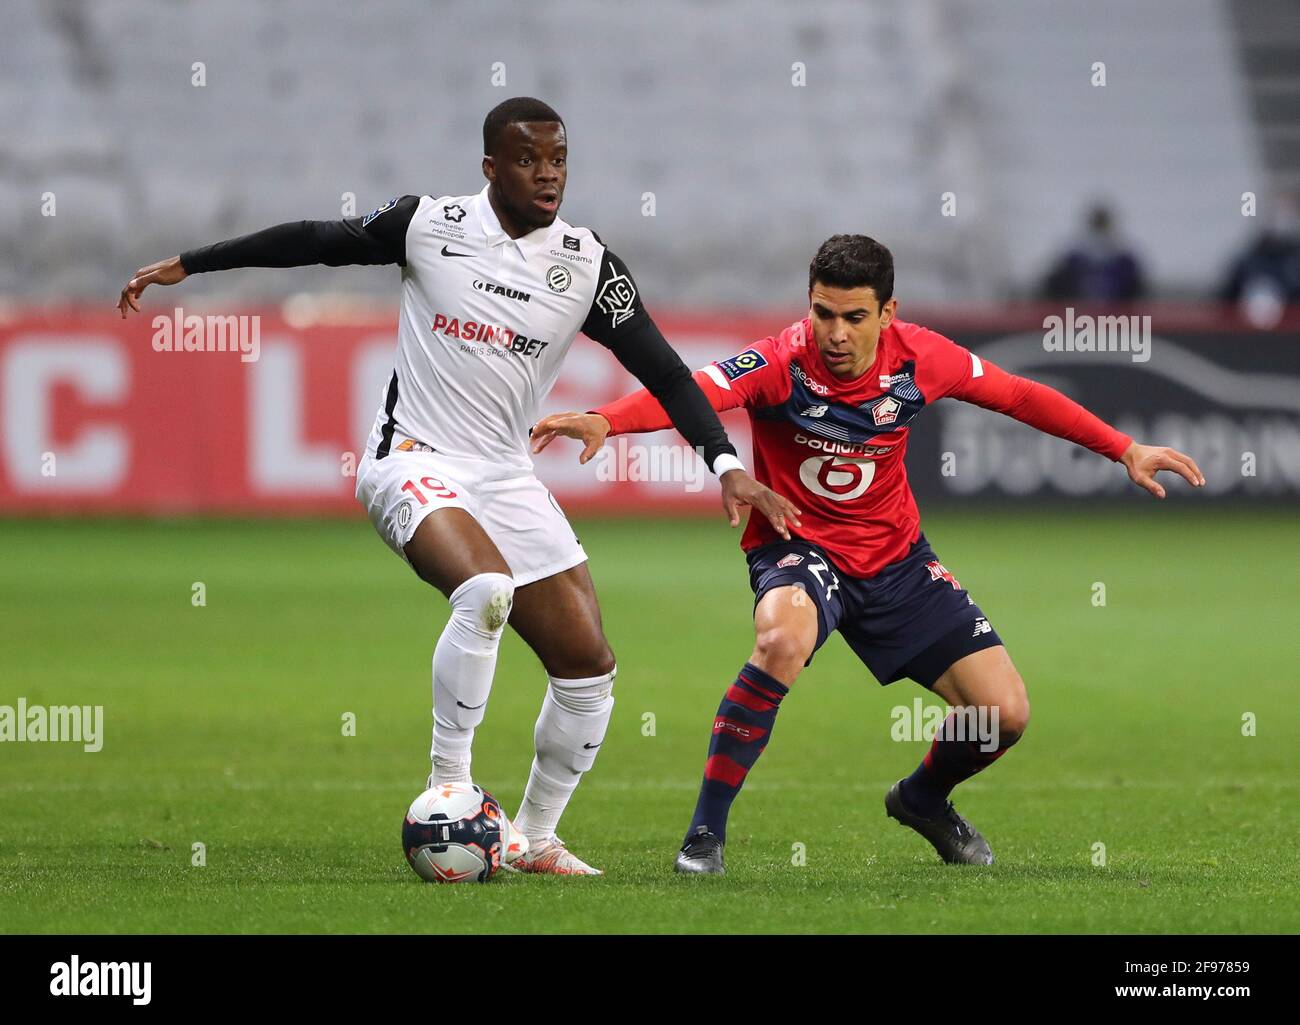 Soccer Football - Ligue 1 - Lille v Montpellier - Stade Pierre-Mauroy, Lille,  France - April 16, 2021 Montpellier's Stephy Mavididi in action with Lille's  Benjamin Andre REUTERS/Pascal Rossignol Stock Photo - Alamy